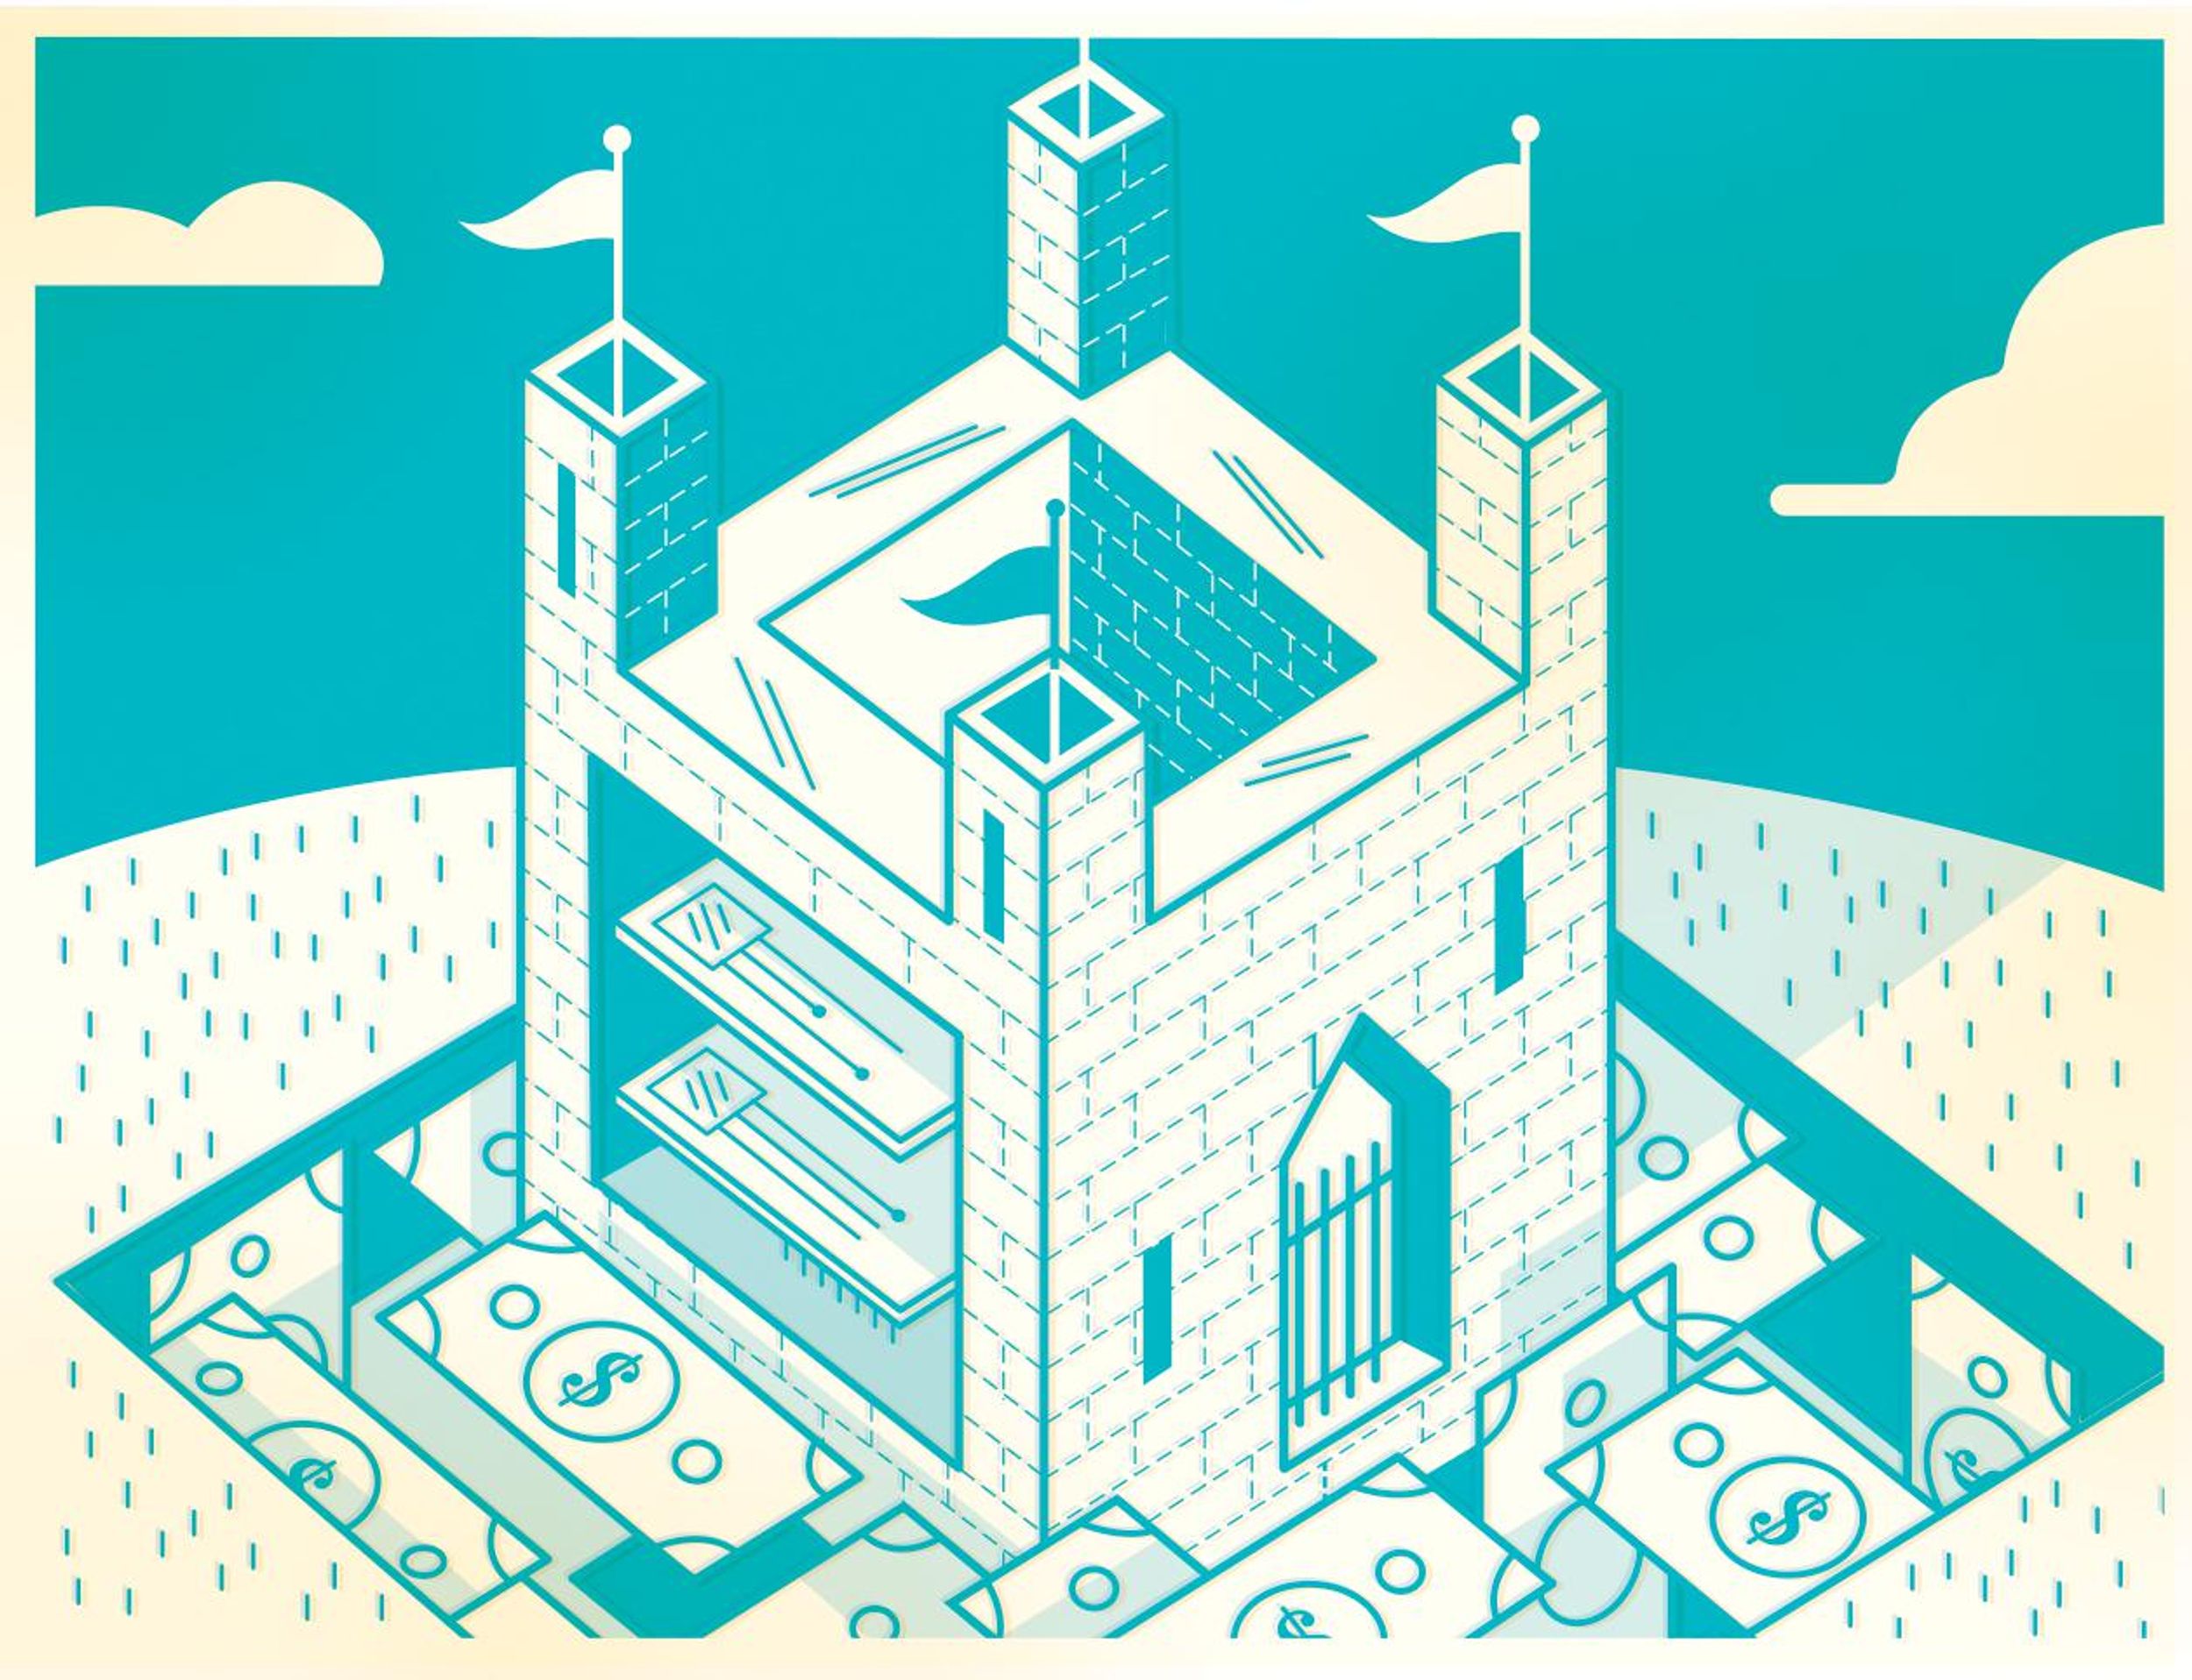 An illustration of a castle with circuit boards inside and surrounded a moat of money.